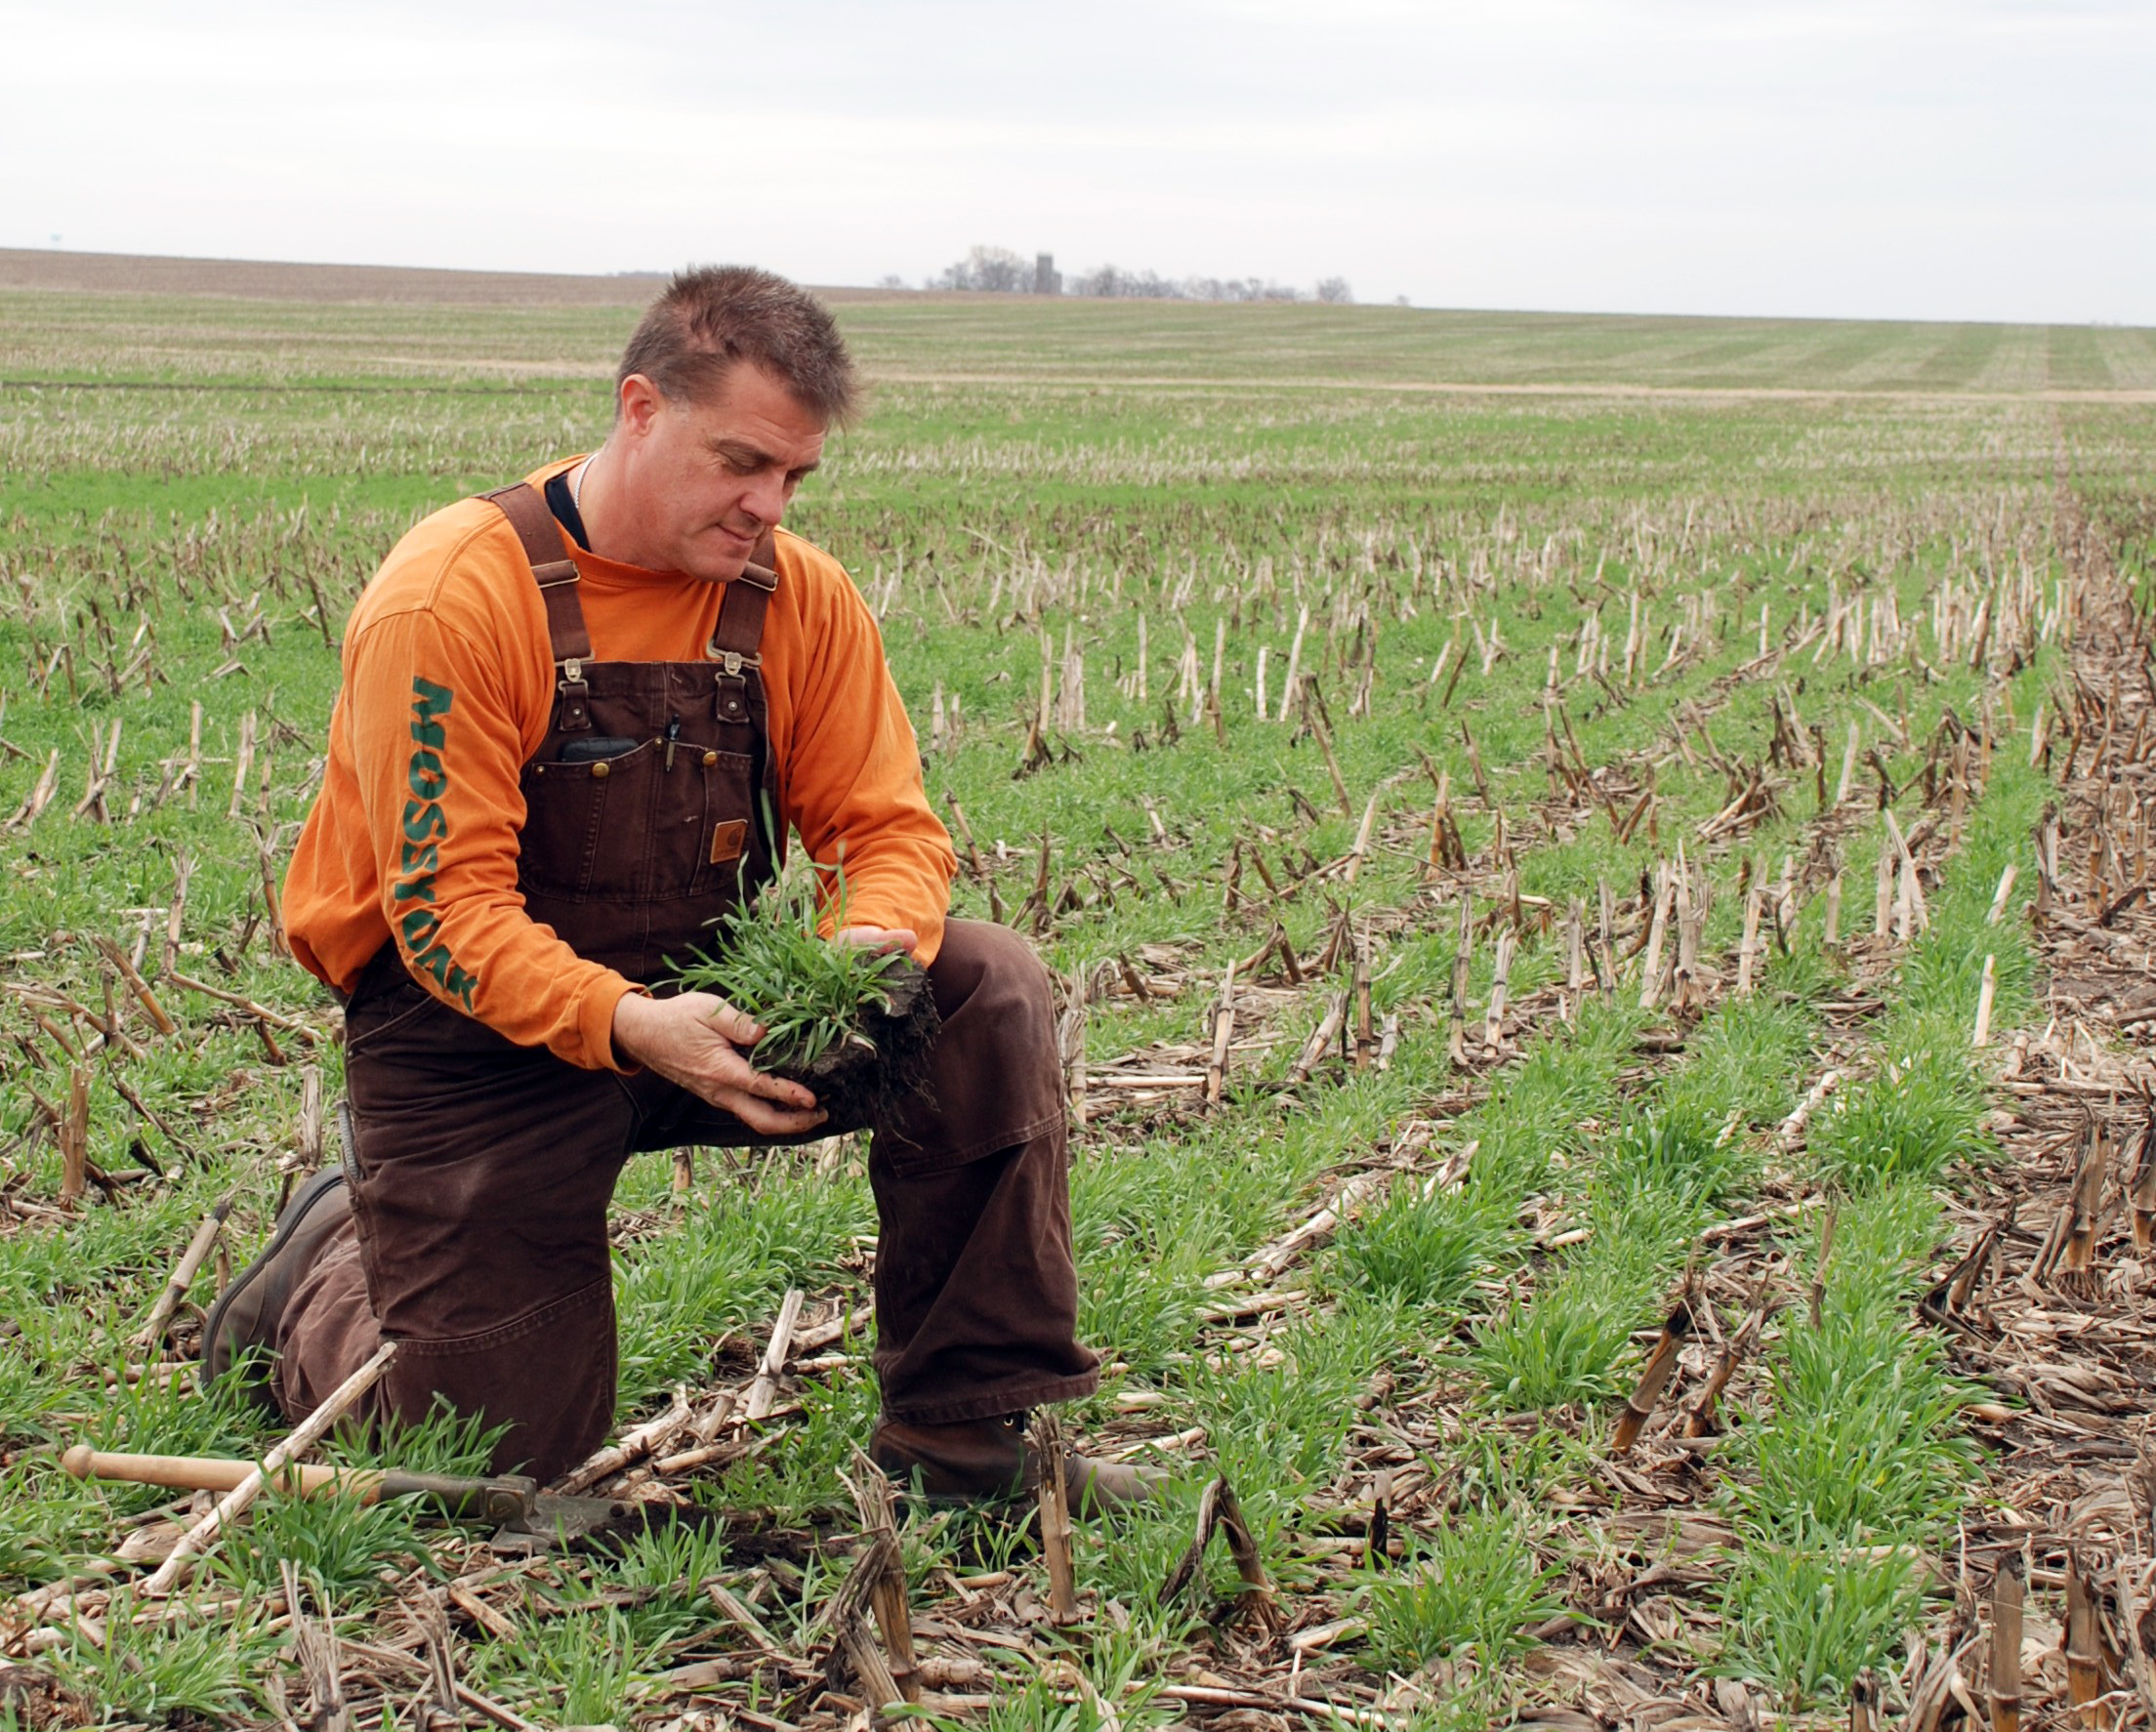 Farmer Tim Recker kneels in a cornfield, holding a clump of cover crops he had planted into the field.